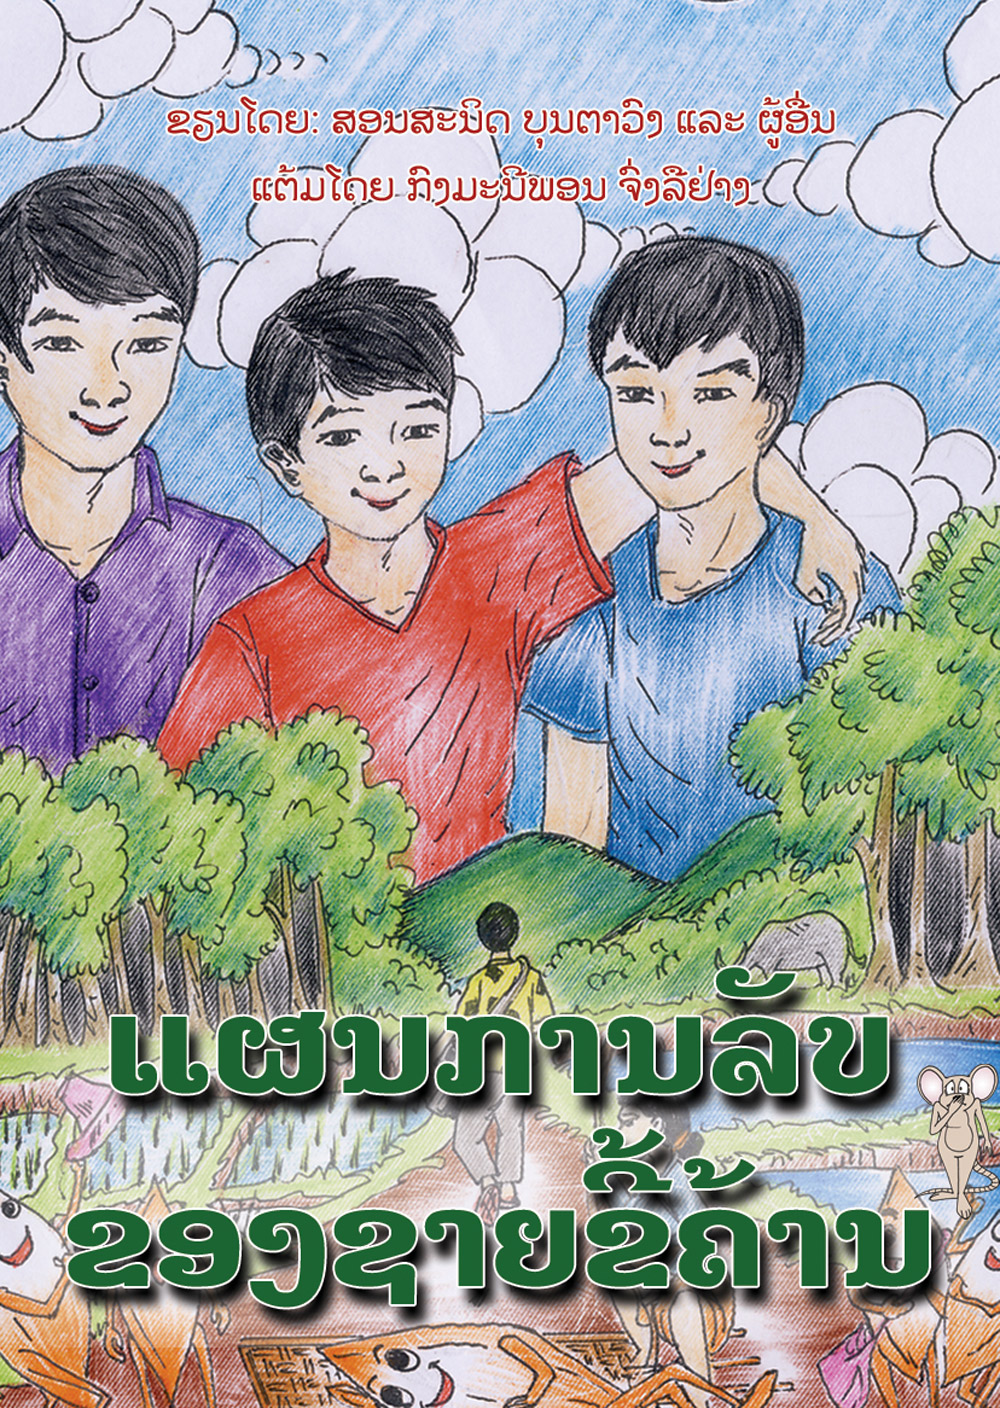 The Lazy Man's Plan large book cover, published in Lao language